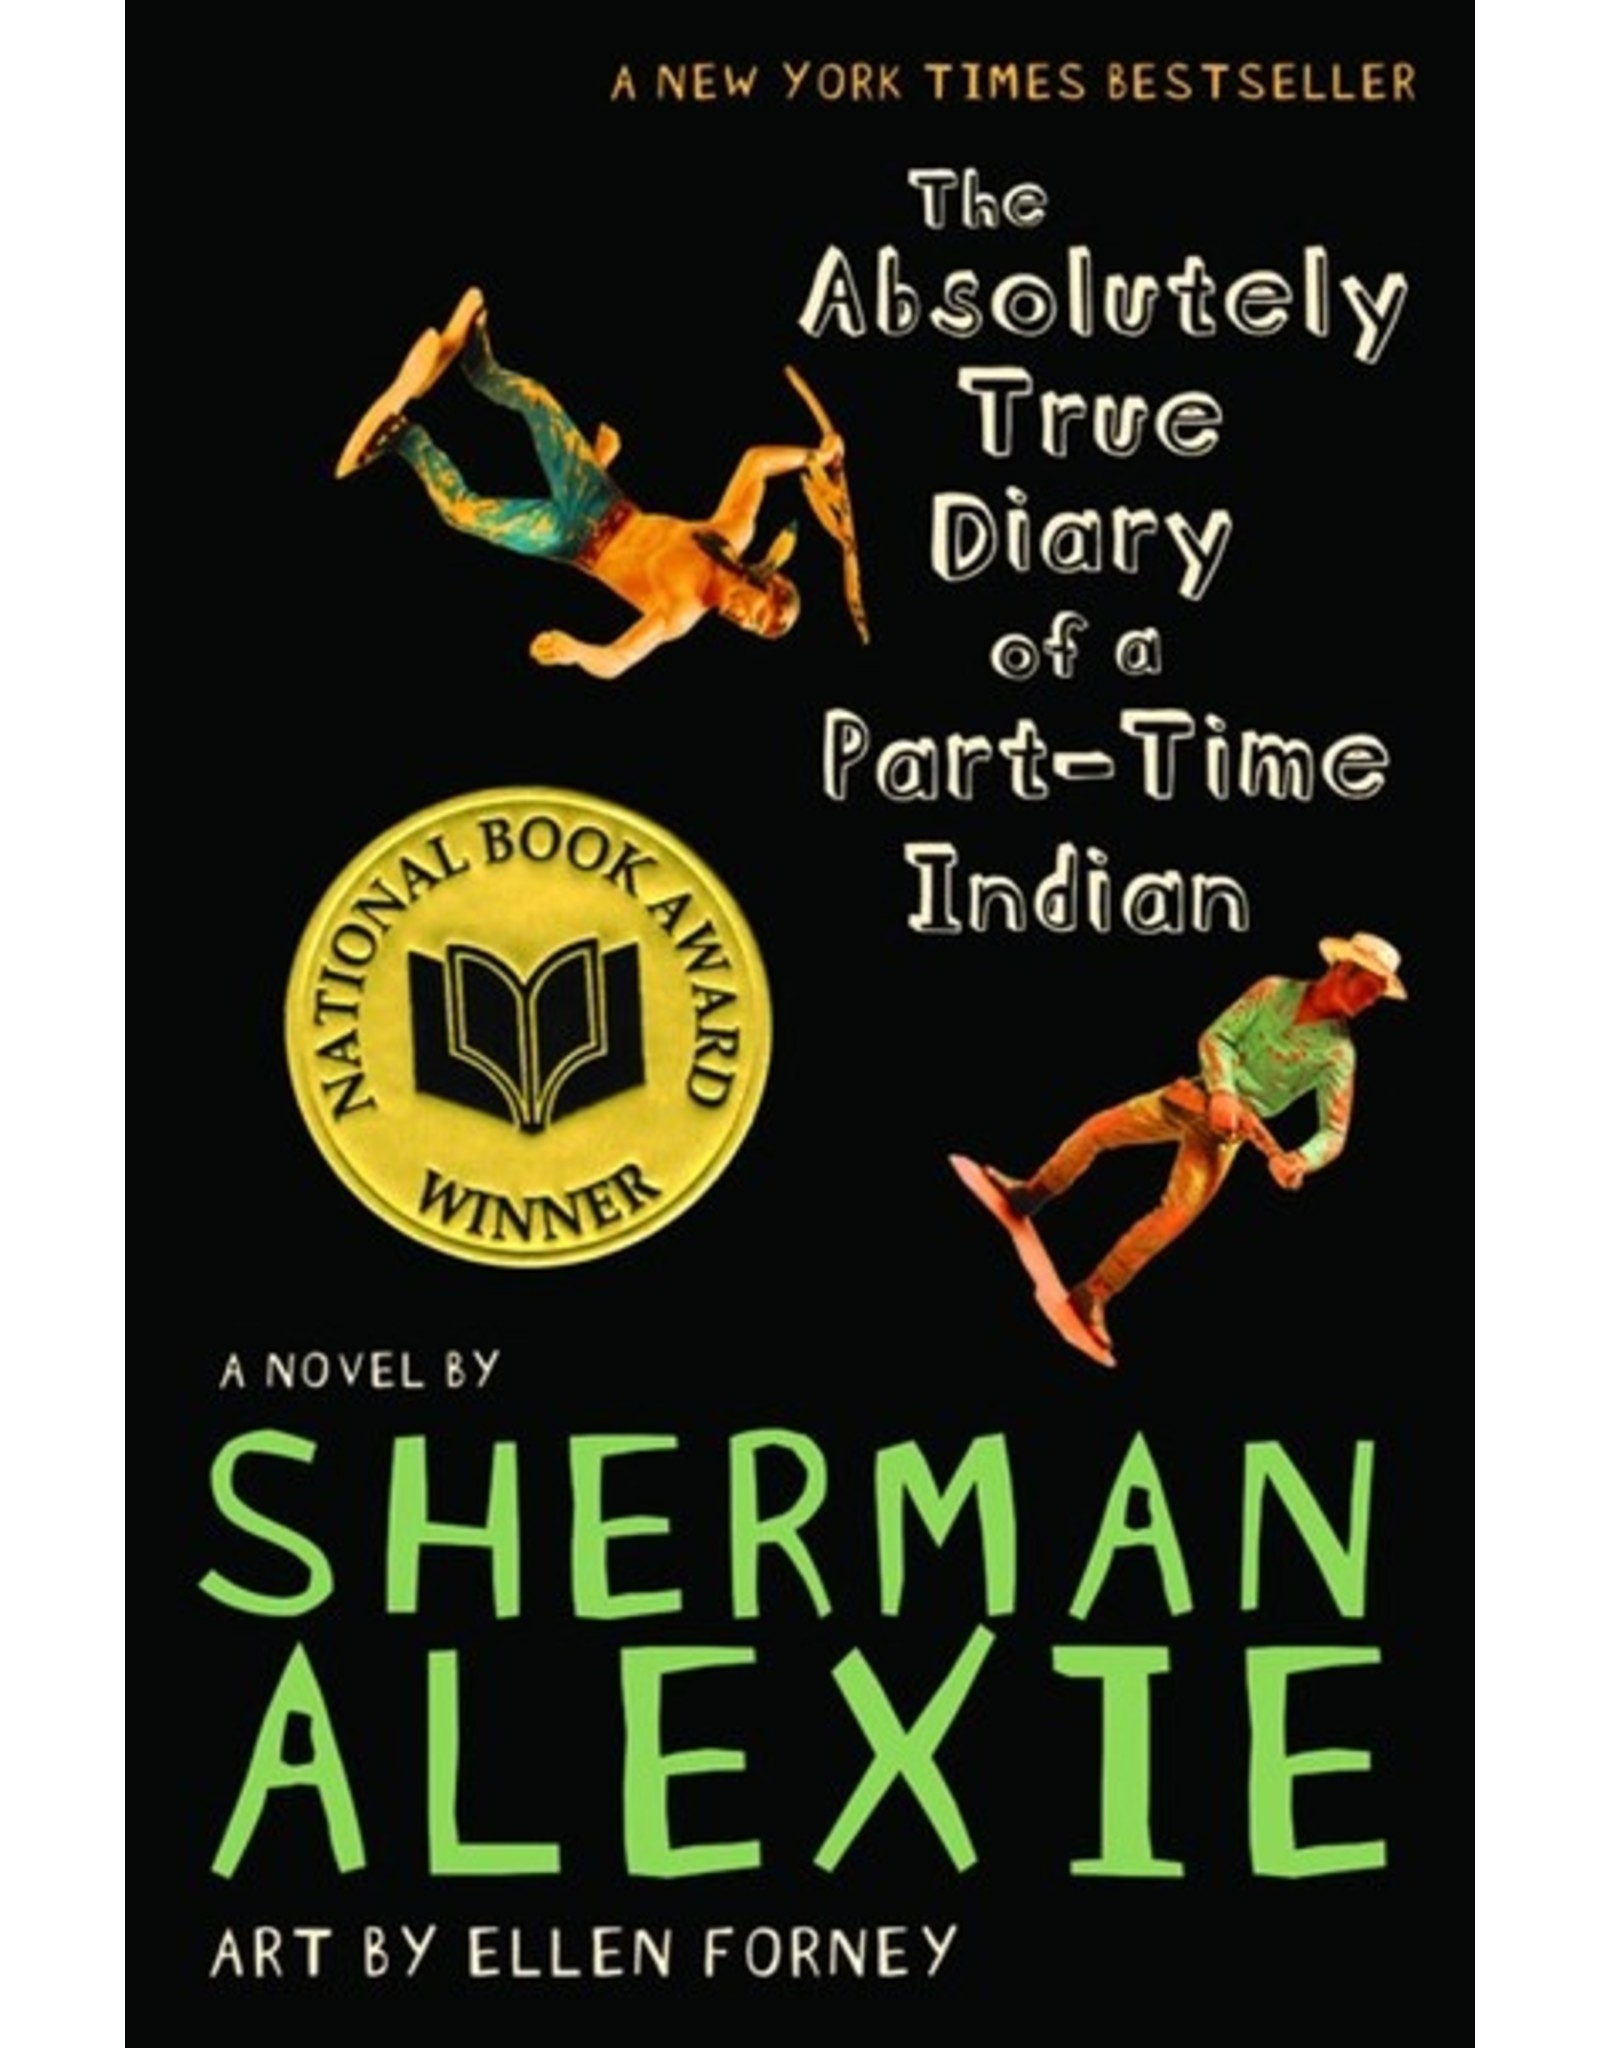 Books The Absolutely True Diary of a Part-Time Indian by Sherman Alexie (Banned Book Week 22)